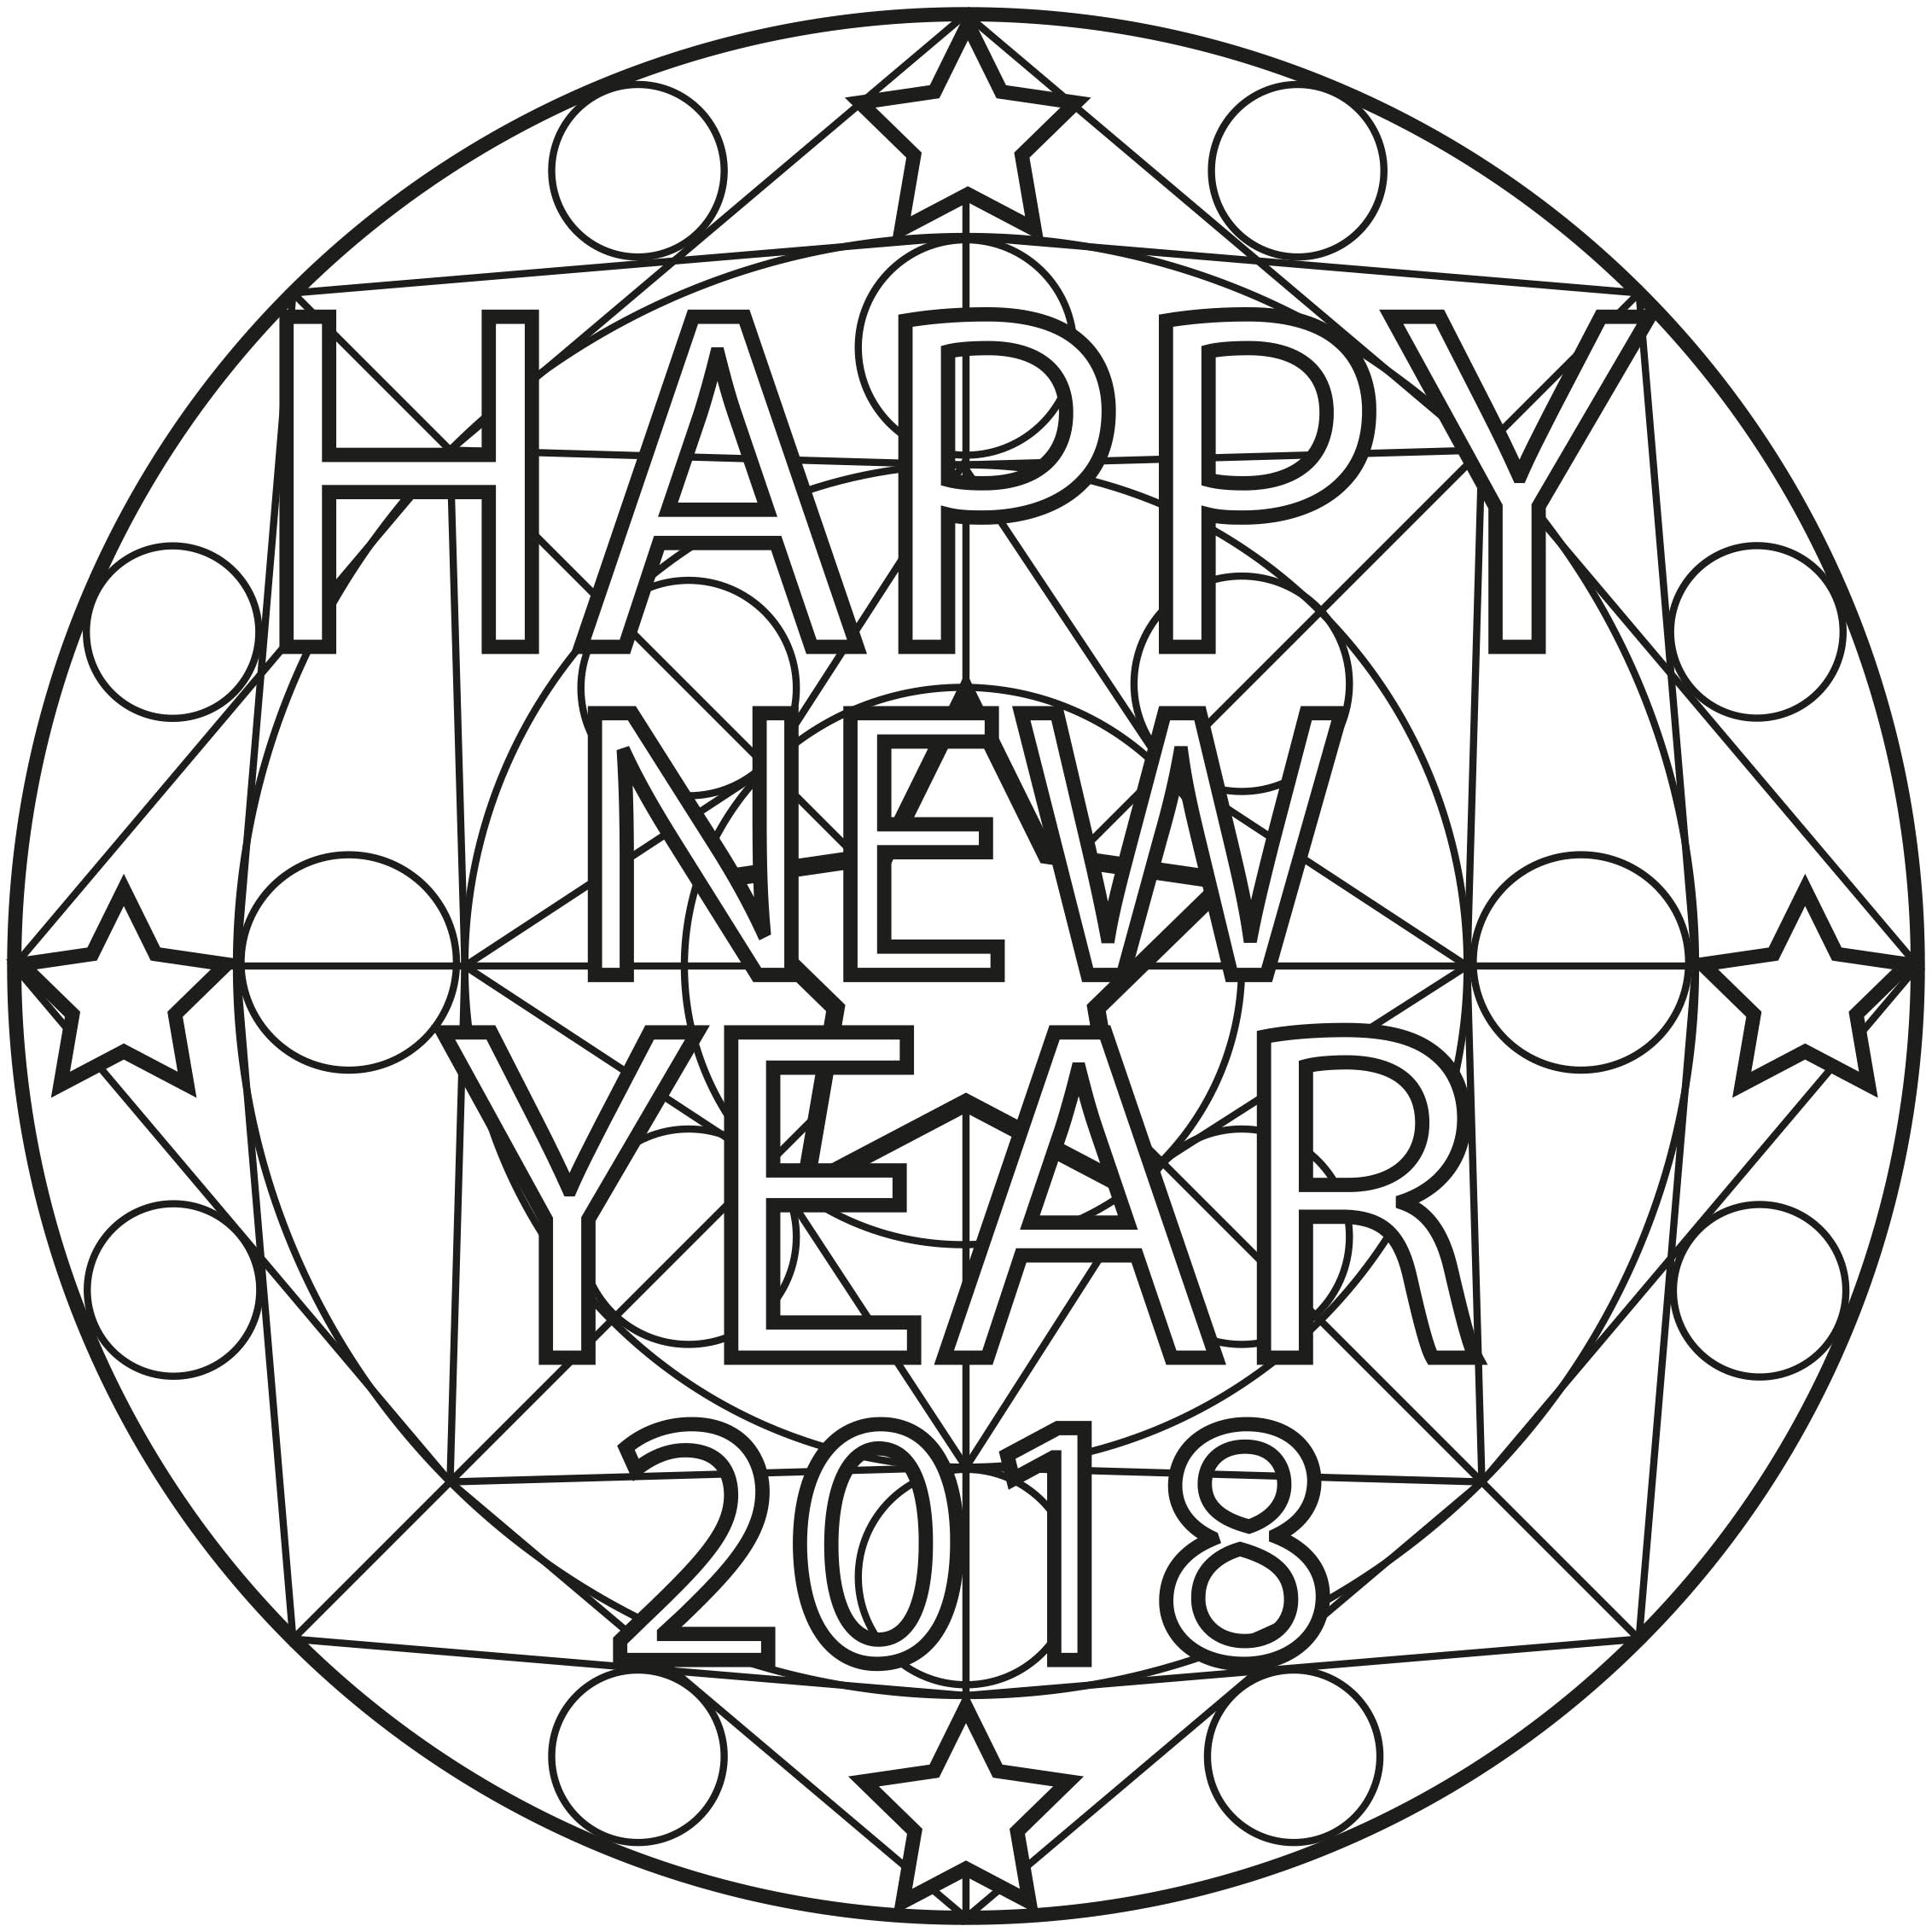 2018 is coming celebrate it by colouring this Mandala, Artist : Allan